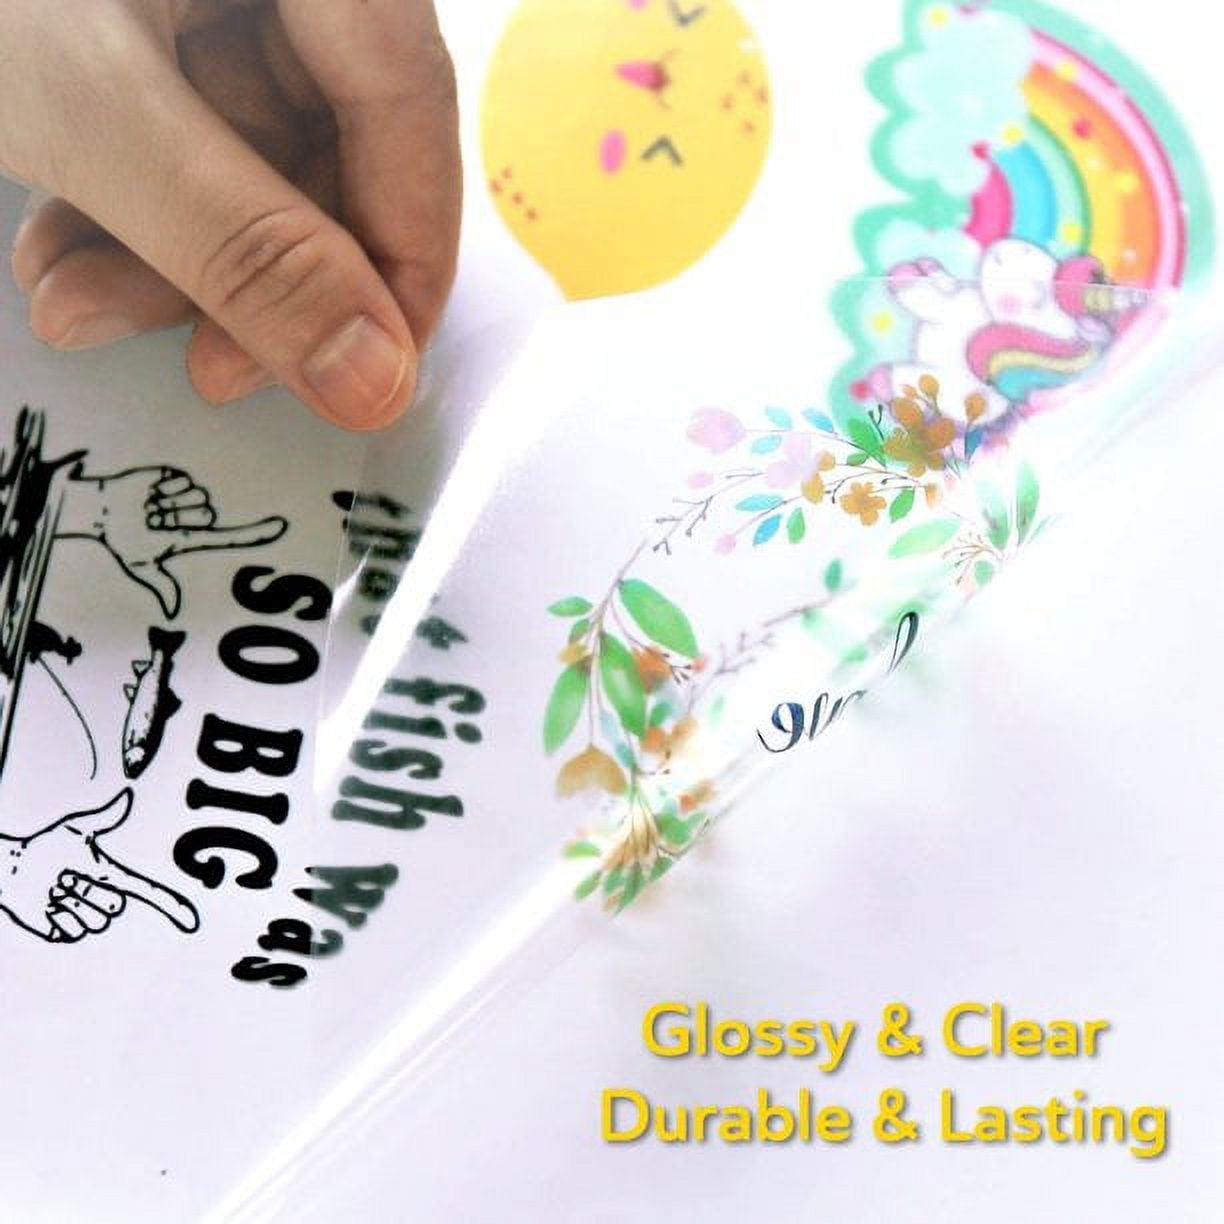 Koala Printable Clear Sticker Paper - Only for Laser Printer - 8.5x11 inch 20 Sheets Full Sheet 100% Transparent Label Paper for DIY Personalized